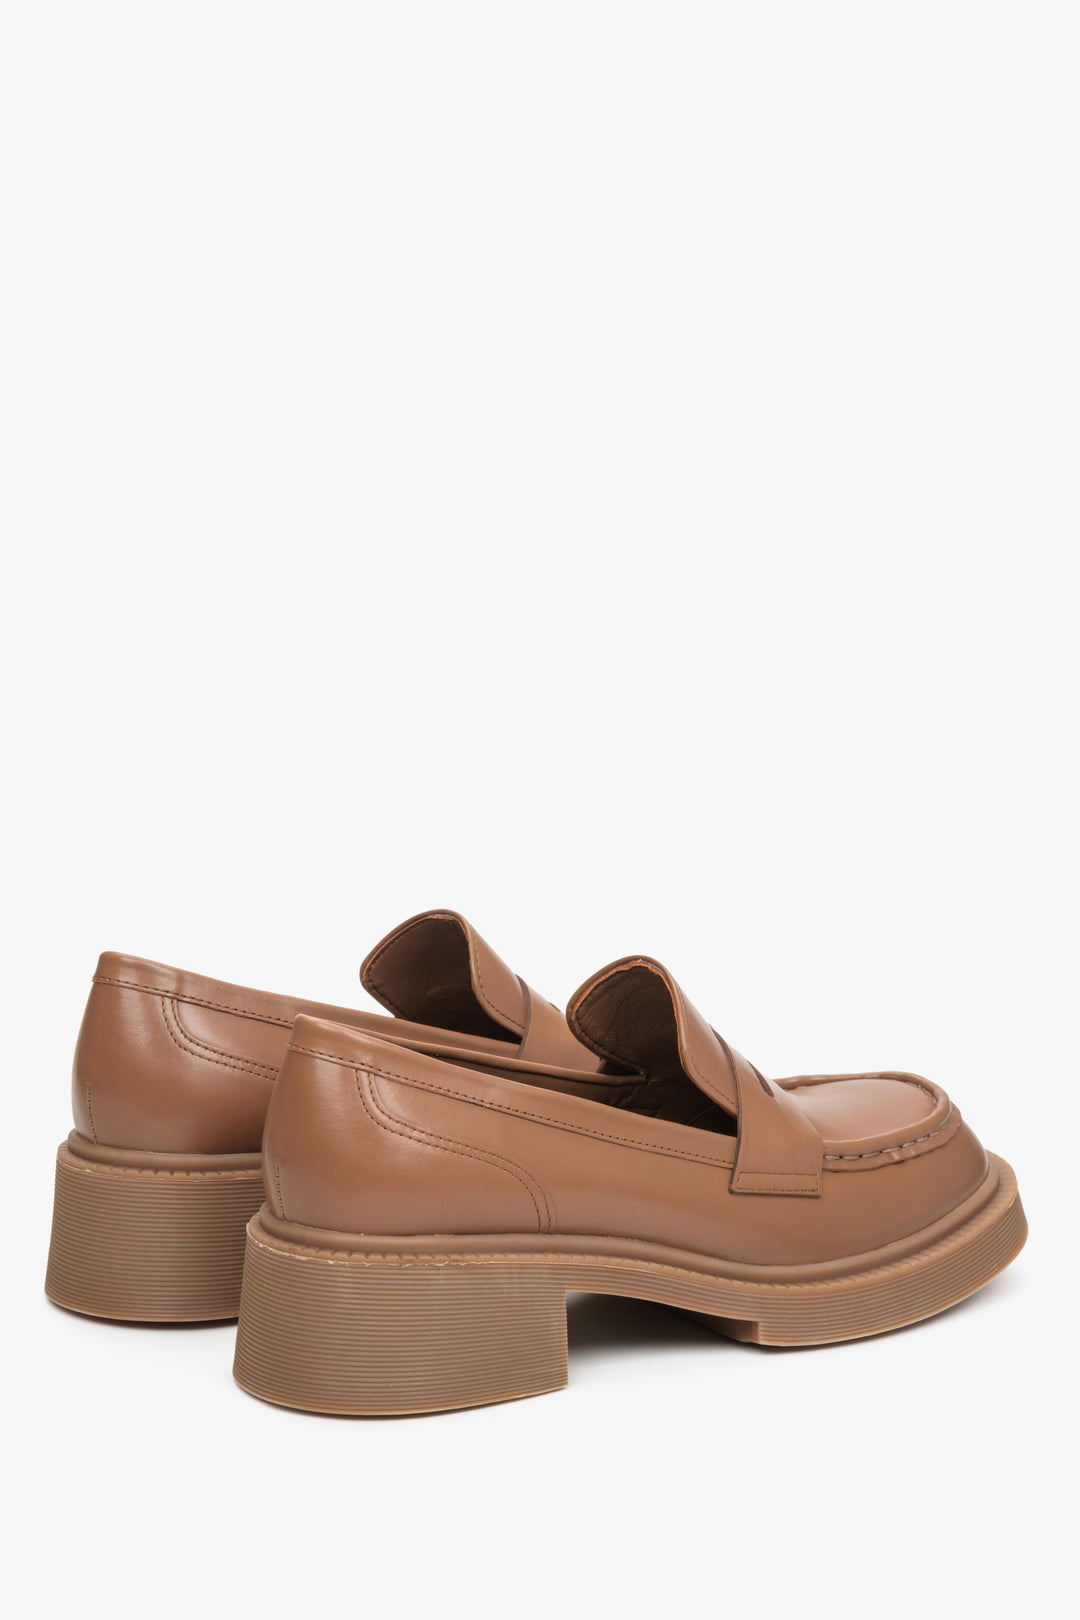 Women's brown leather moccasin shoes with a stable heel, Estro - close-up on the side line and heel counters.